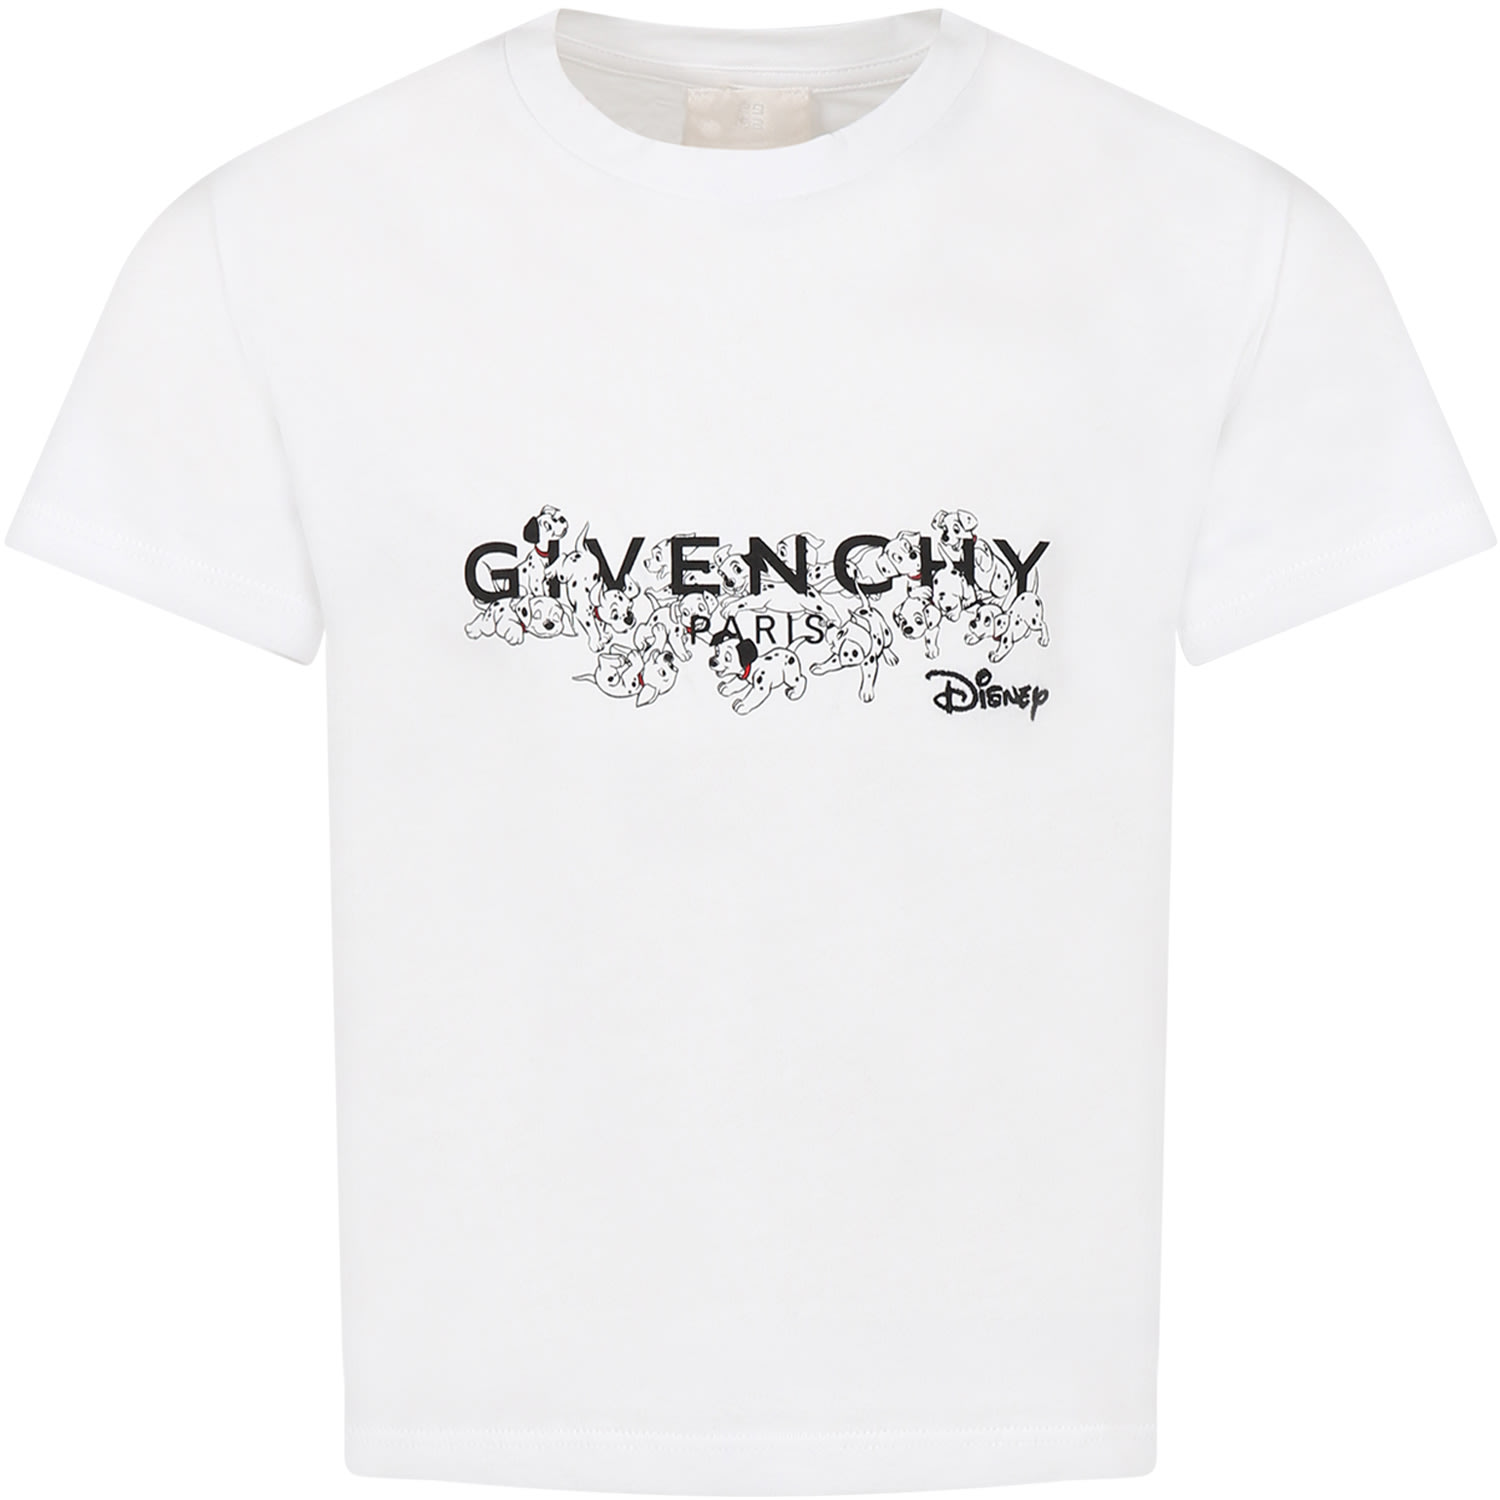 Givenchy White T-shirt For Kids With 101 Dalmatians And Logo